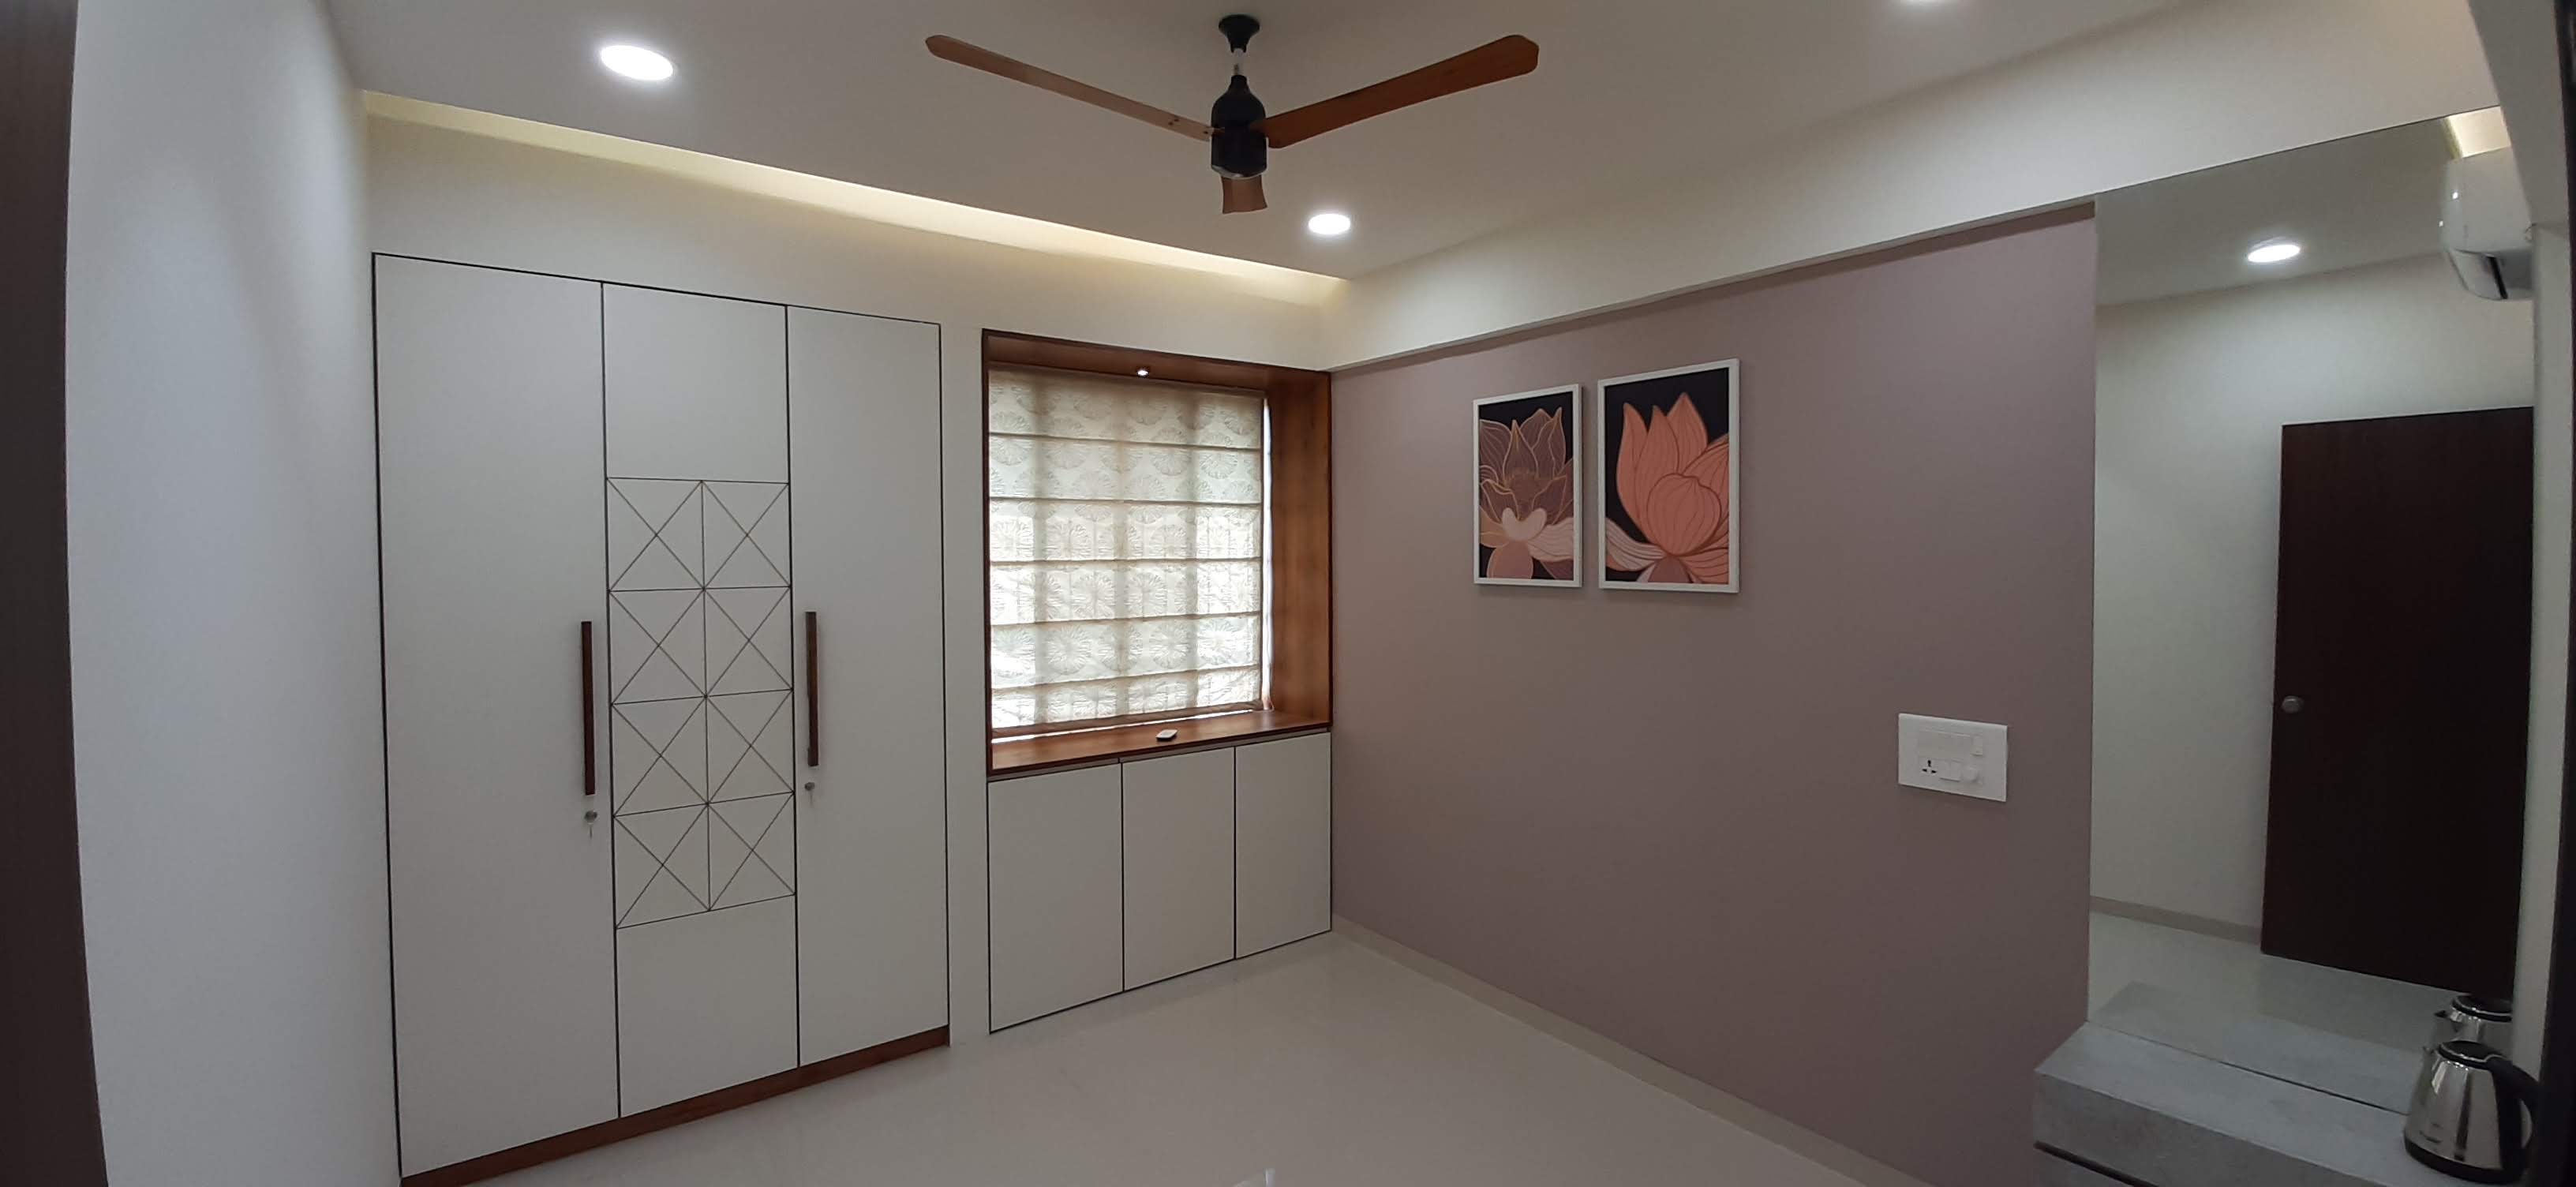 Flat Interior For Bhopale Family At Kolhapur